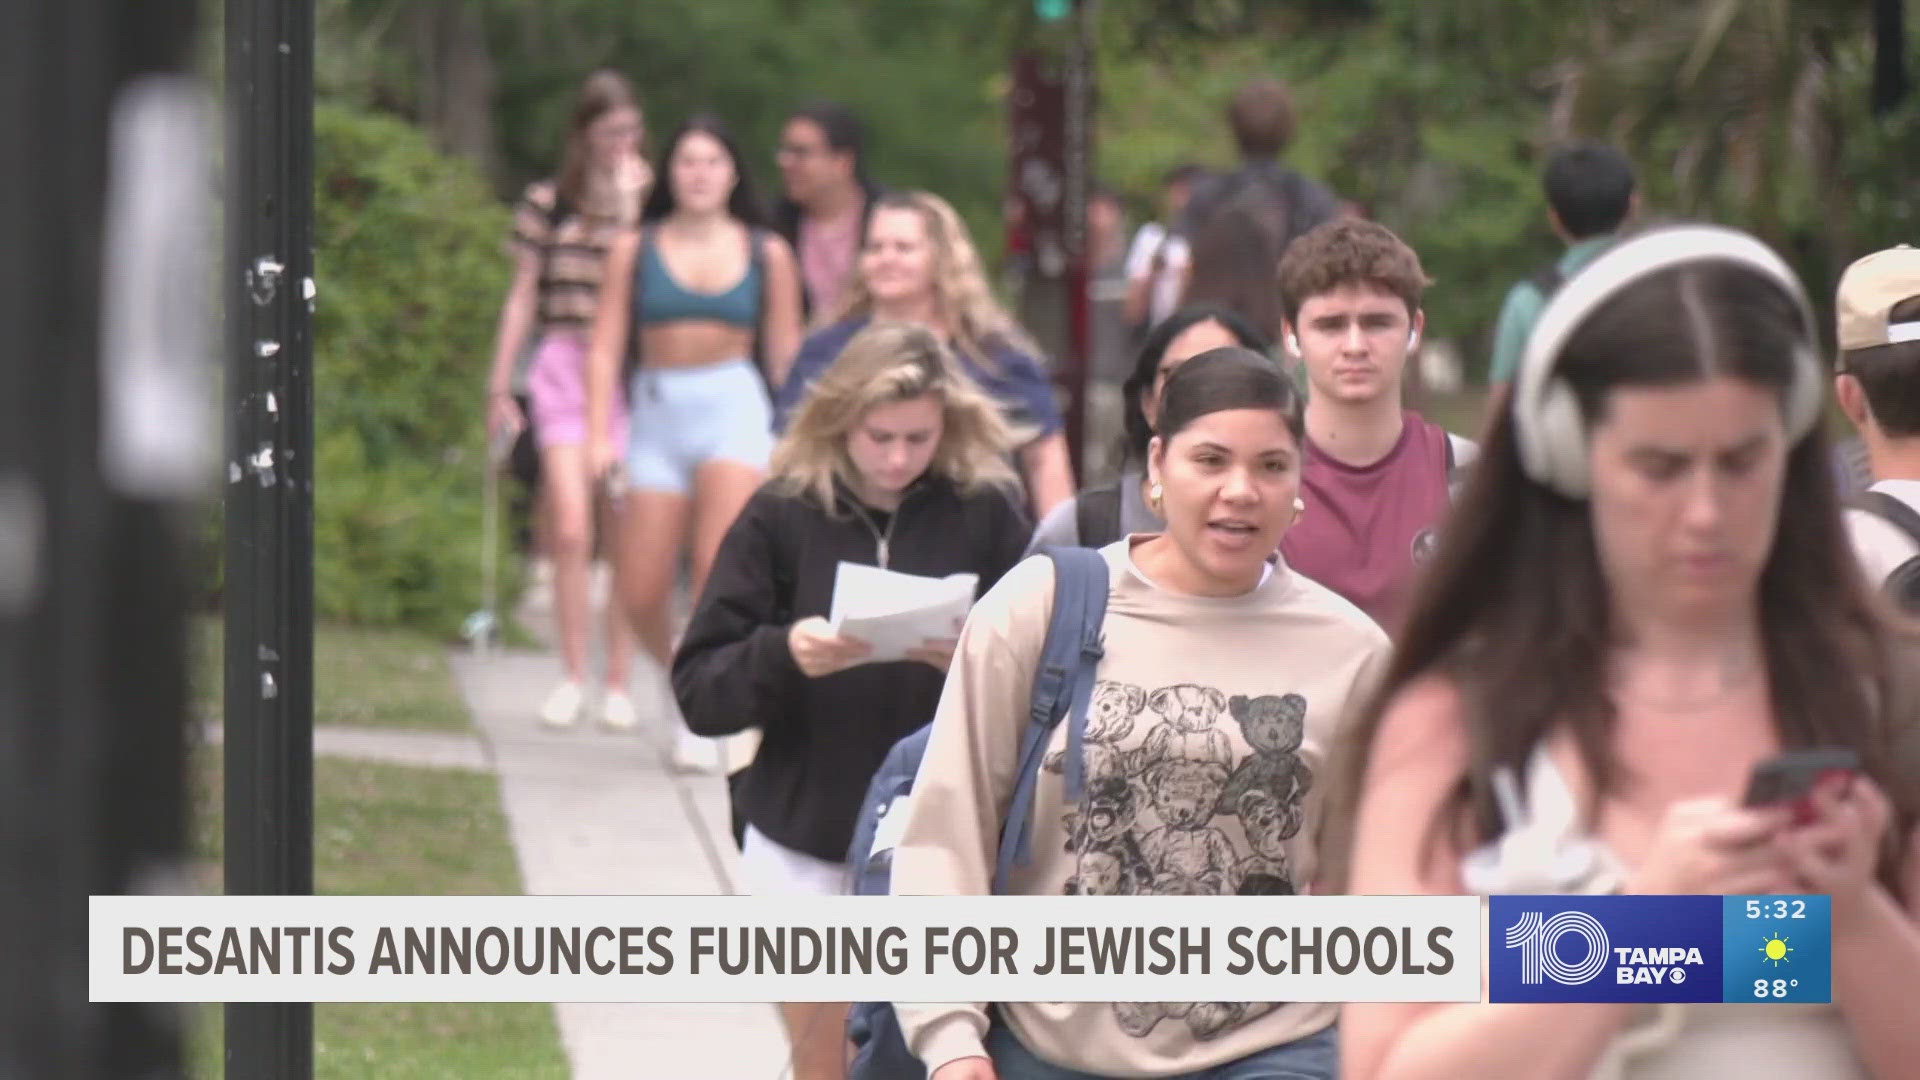 DeSantis also said he would approve an additional $20 million in the 2024-25 fiscal budget for security at Jewish day schools.